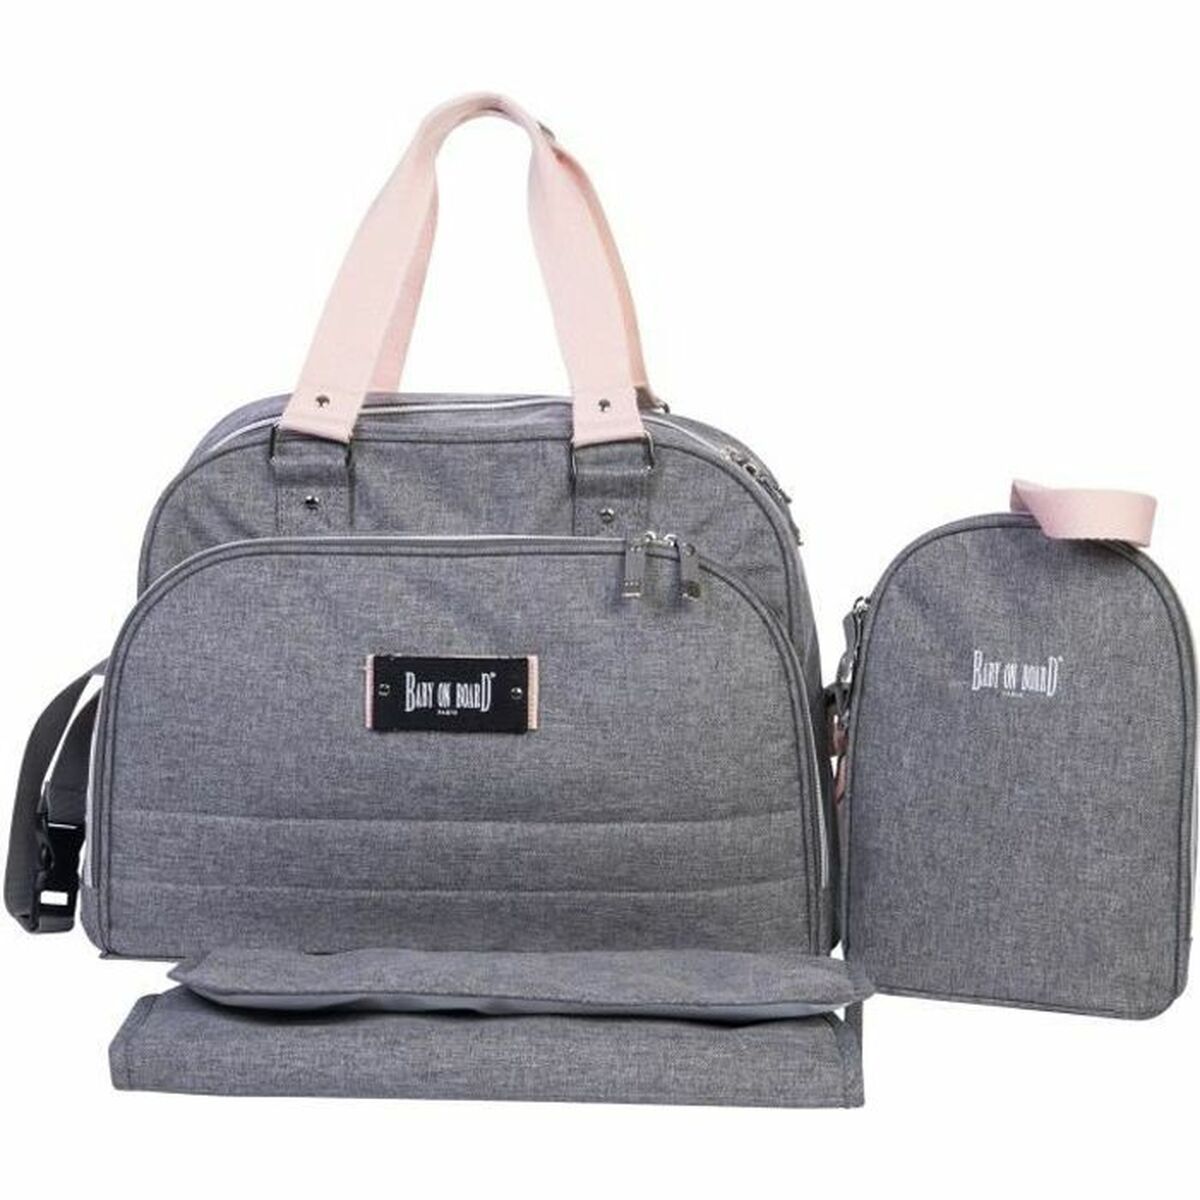 Diaper Changing Bag Baby on Board URBAN Sweet Grey Pink - Little Baby Shop